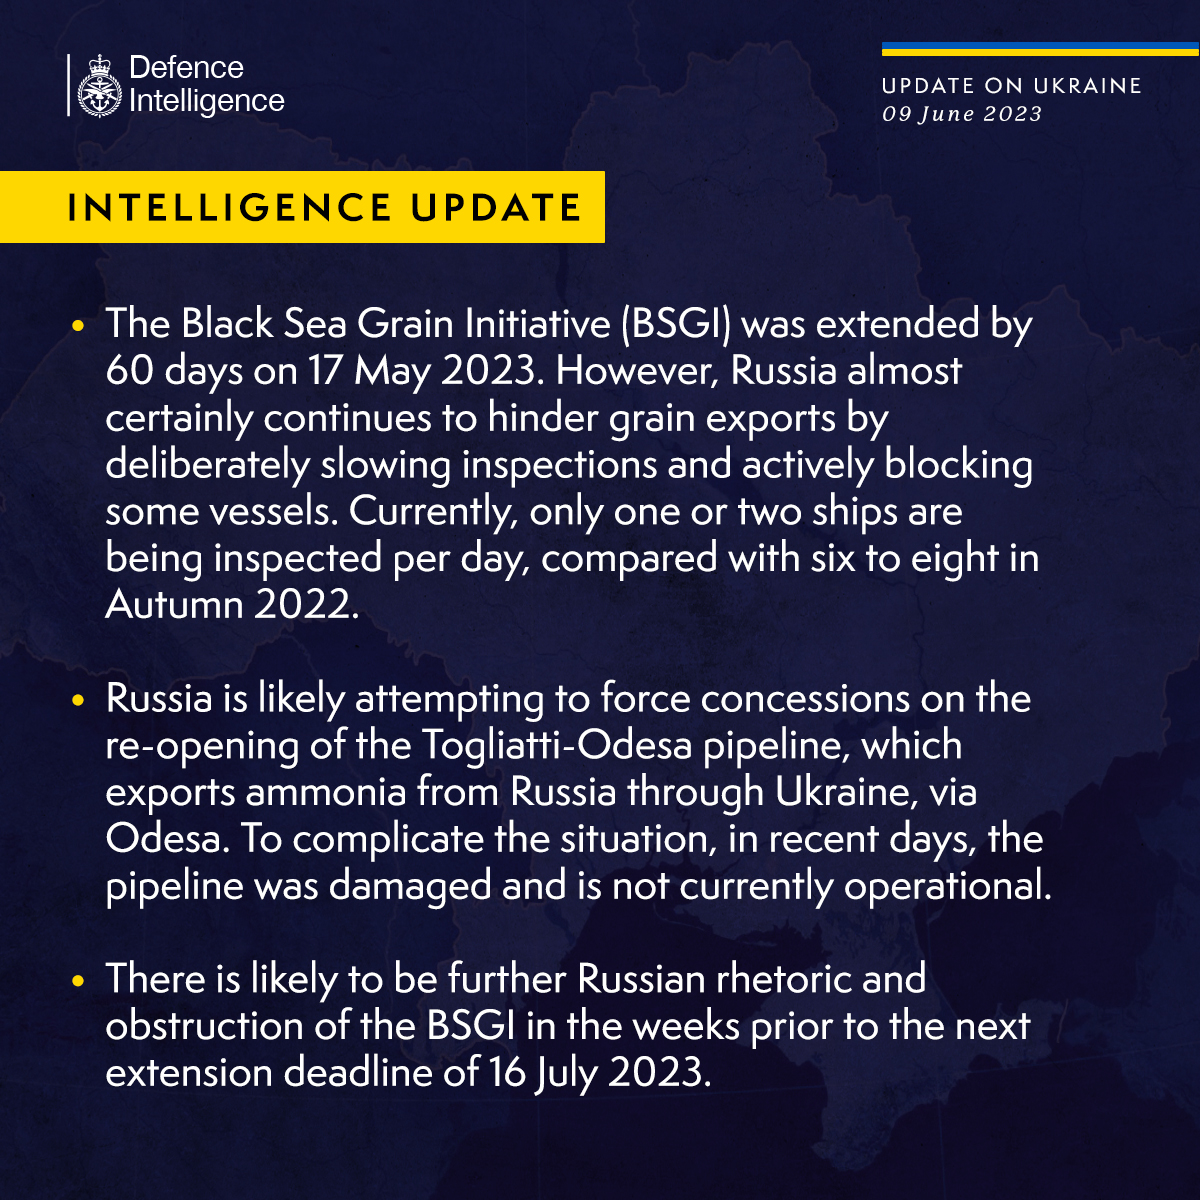 Latest Defence Intelligence update on the situation in Ukraine - 9 June 2023. Please read thread below for full image text.